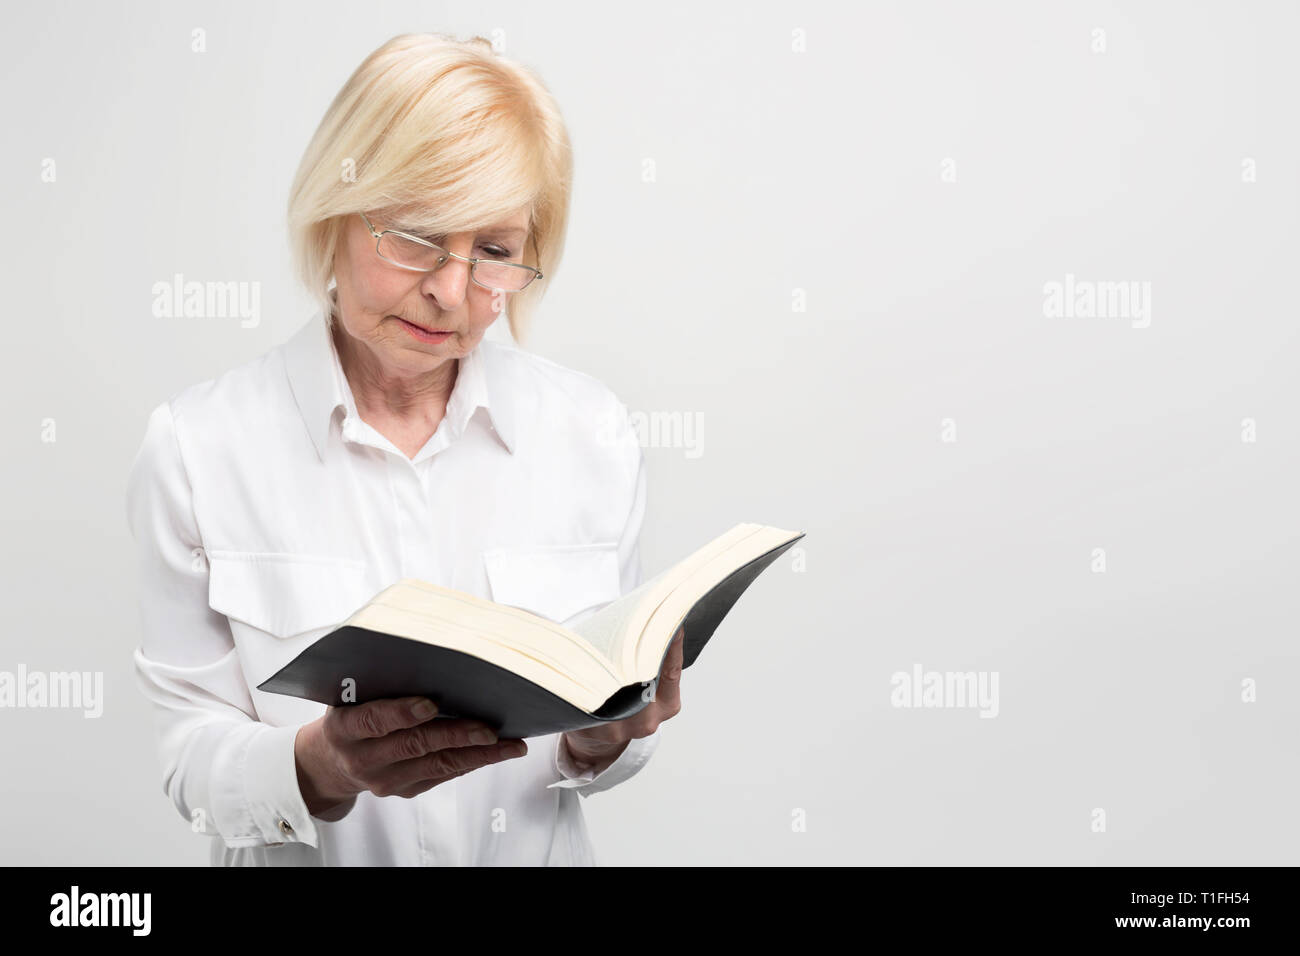 Senior business woman is standing in the room and reading a book. It is very interesting. Isolated on white background. Stock Photo